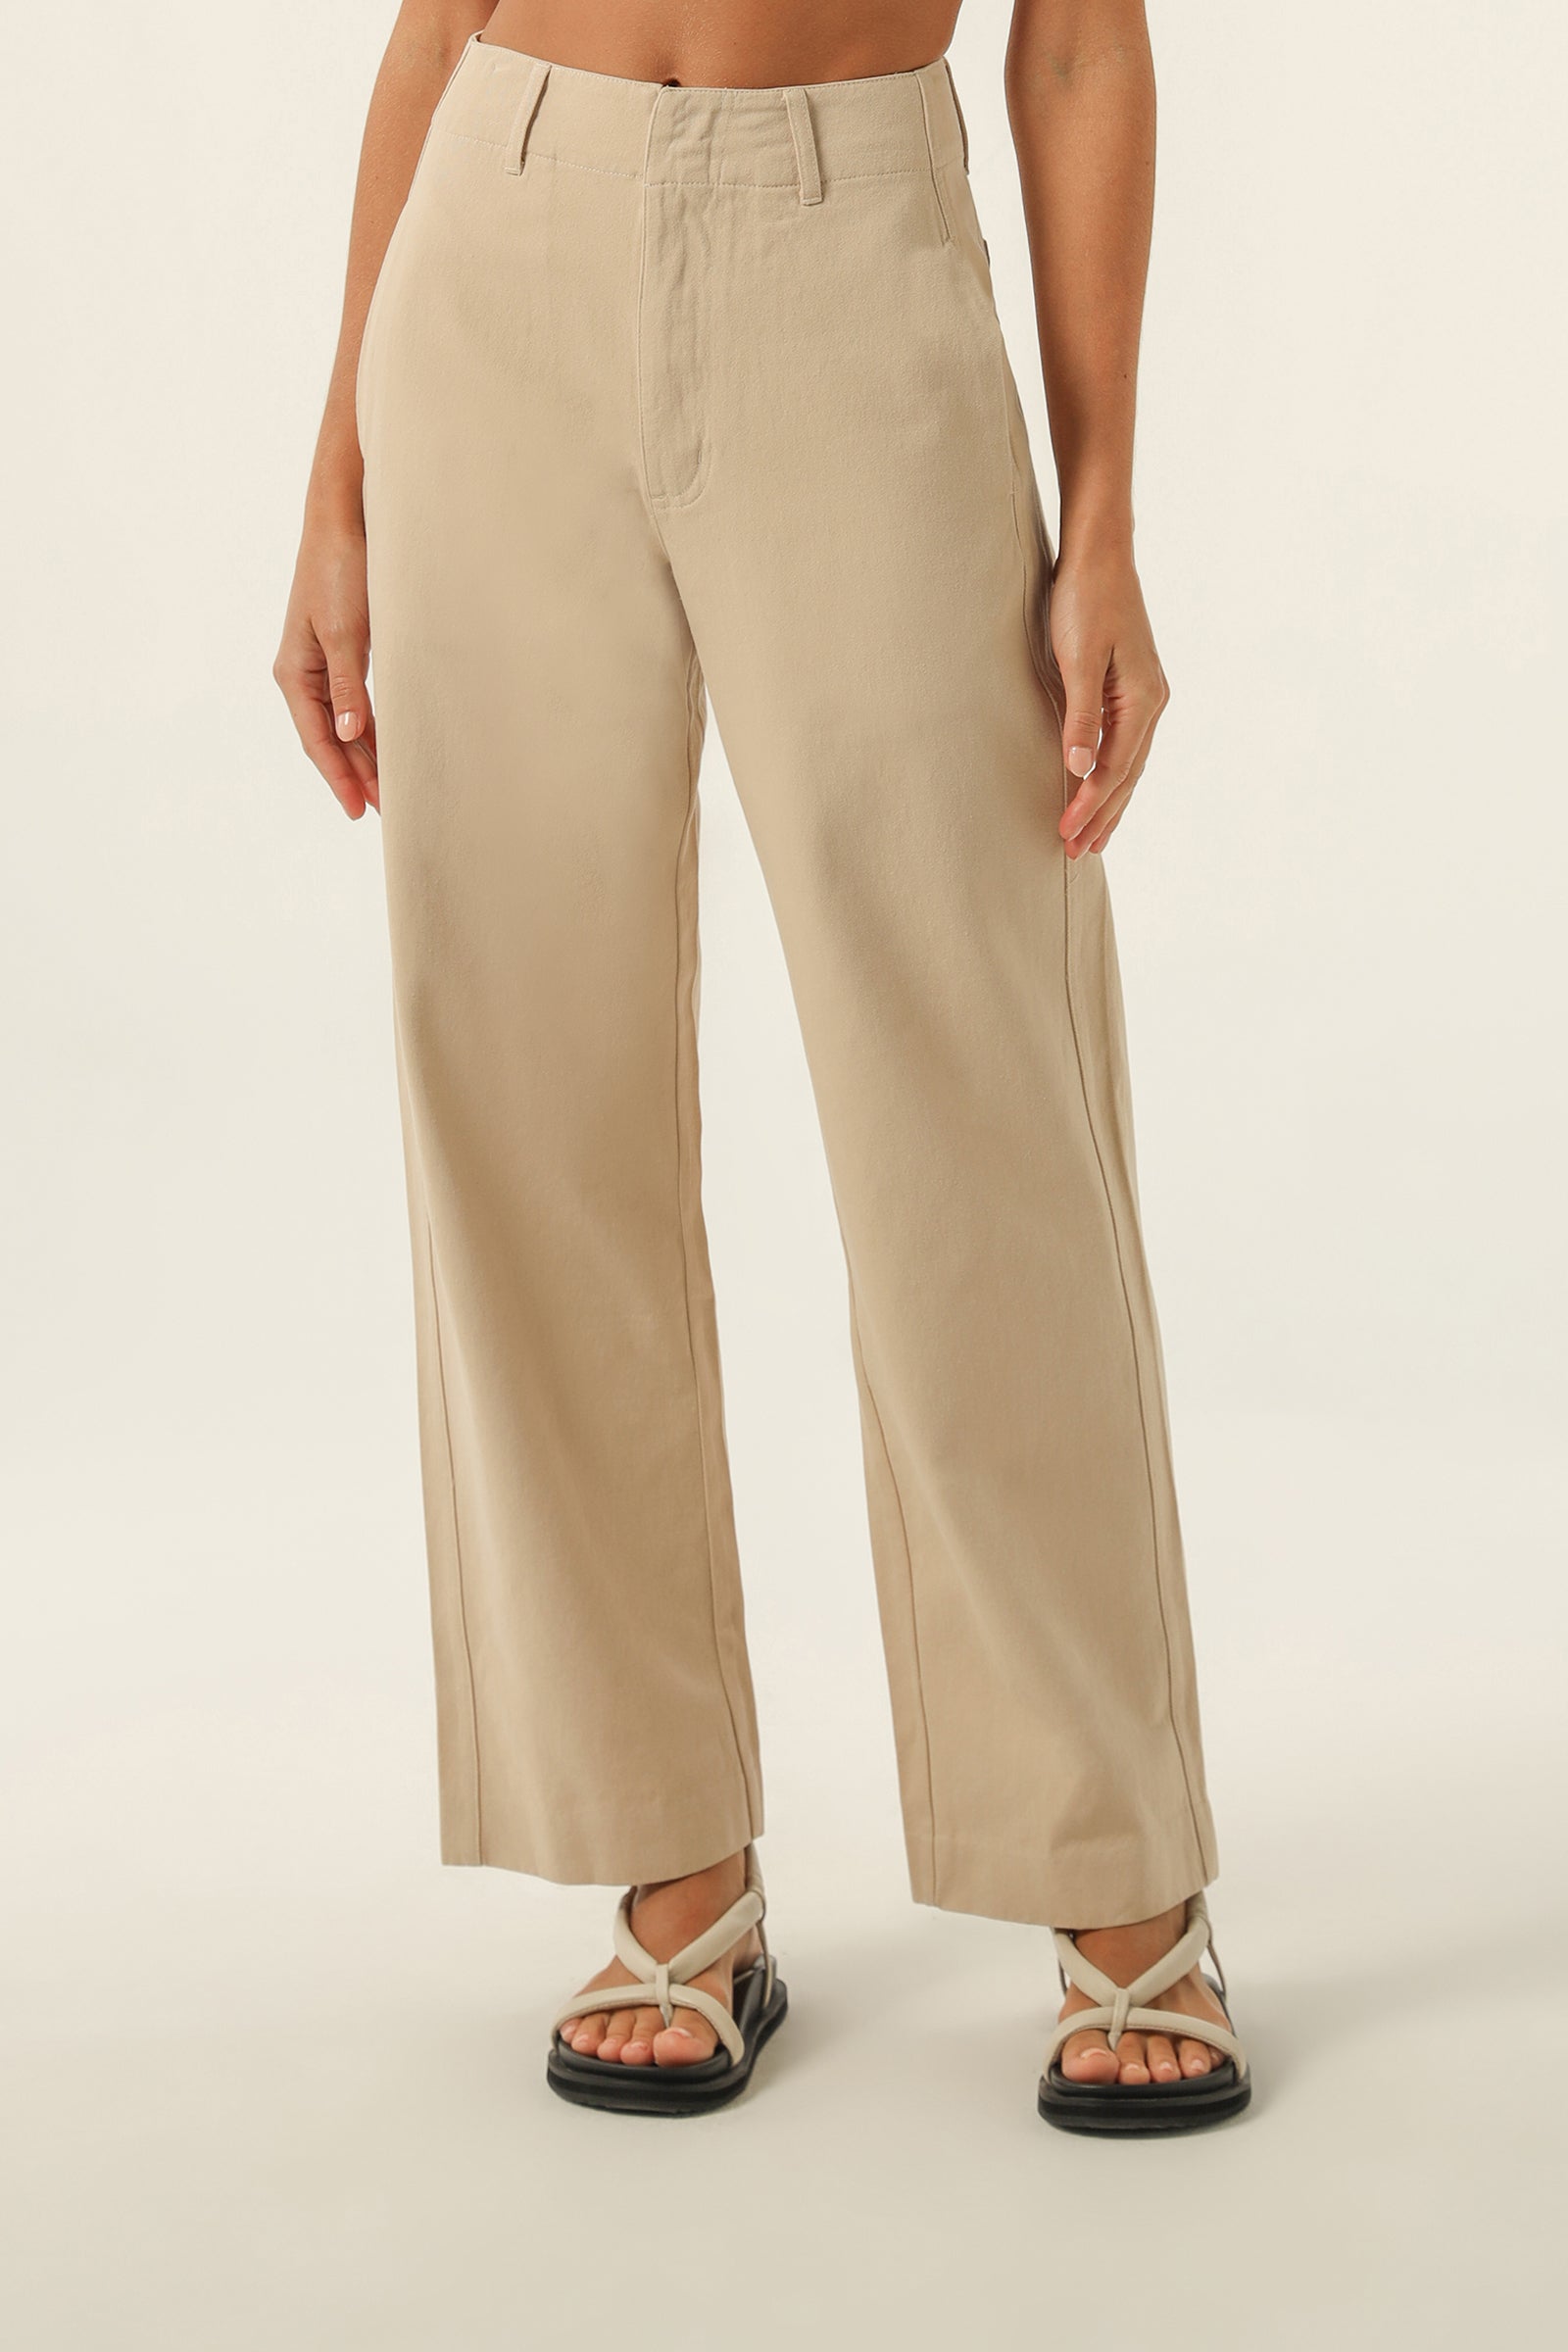 Nude Lucy Cooper Pant In a Yellow Sand Colour